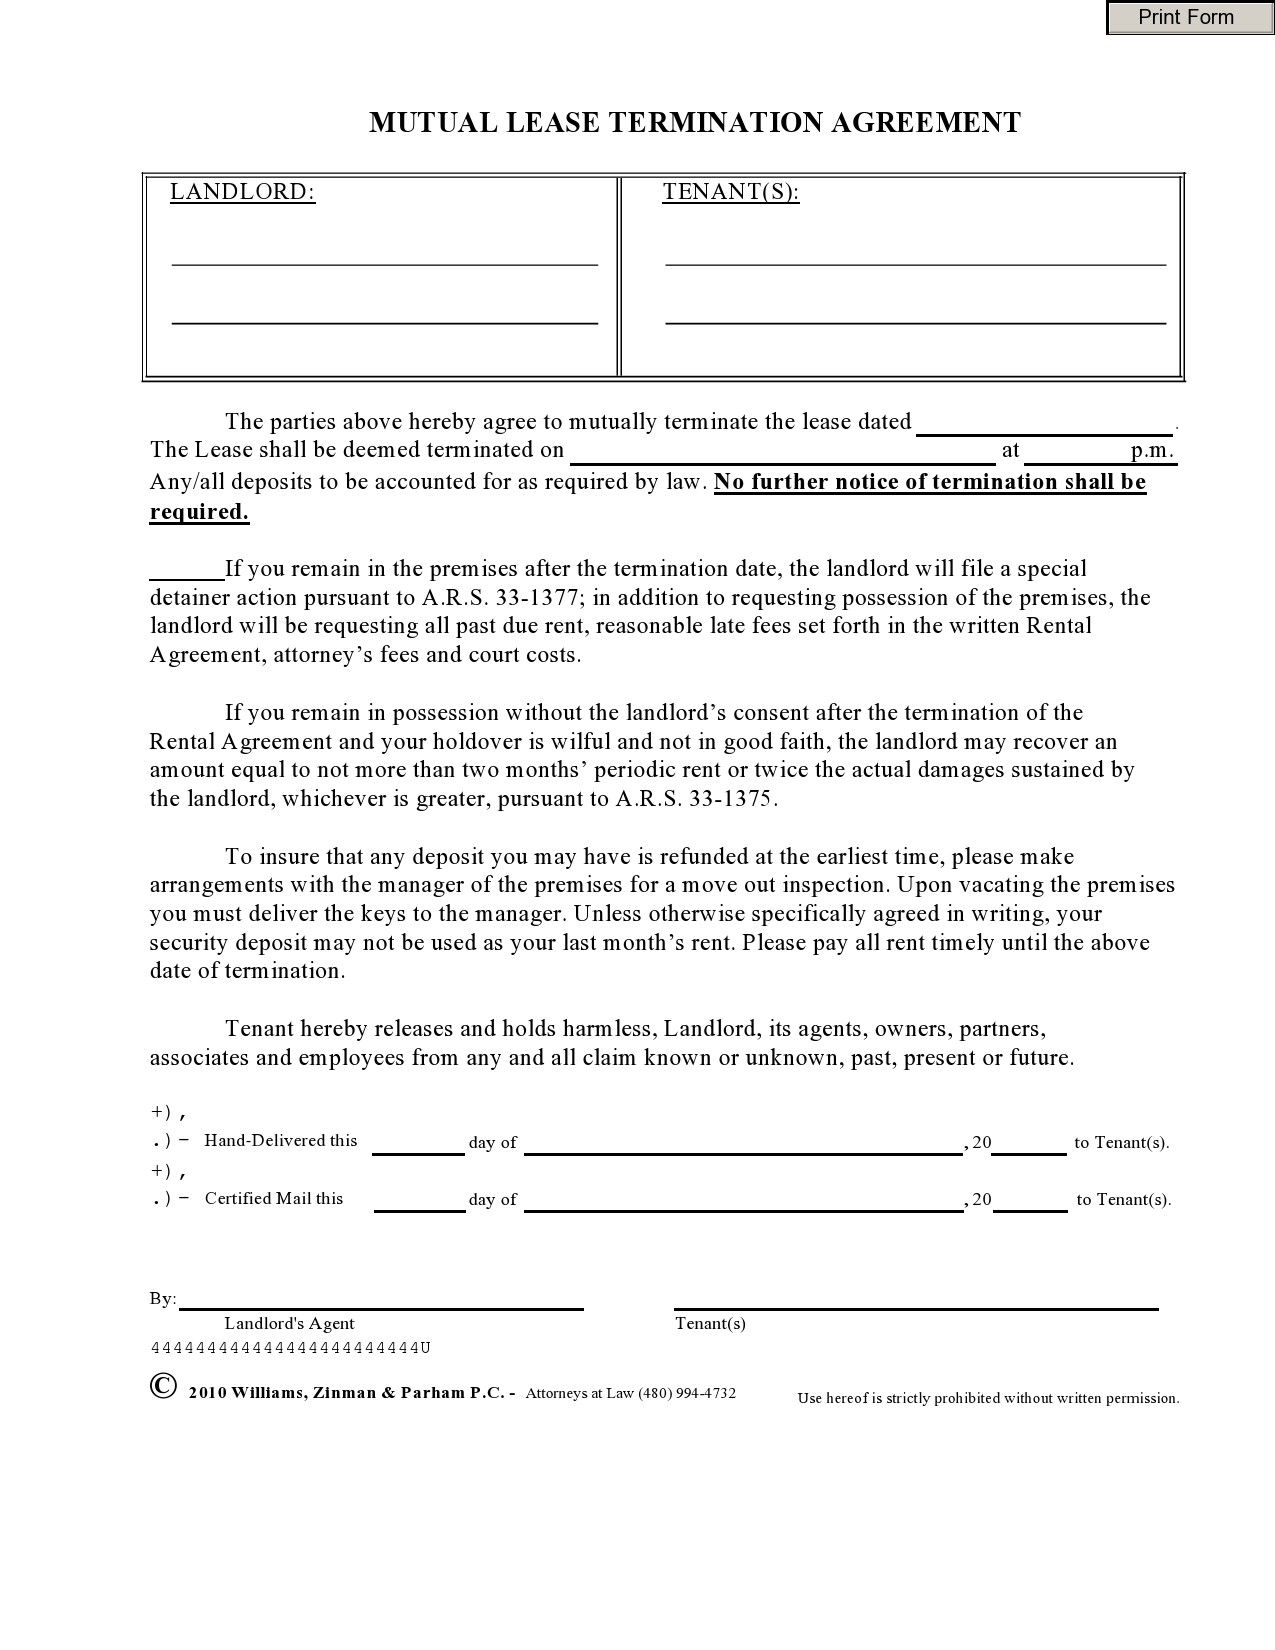 Free lease termination agreement 08